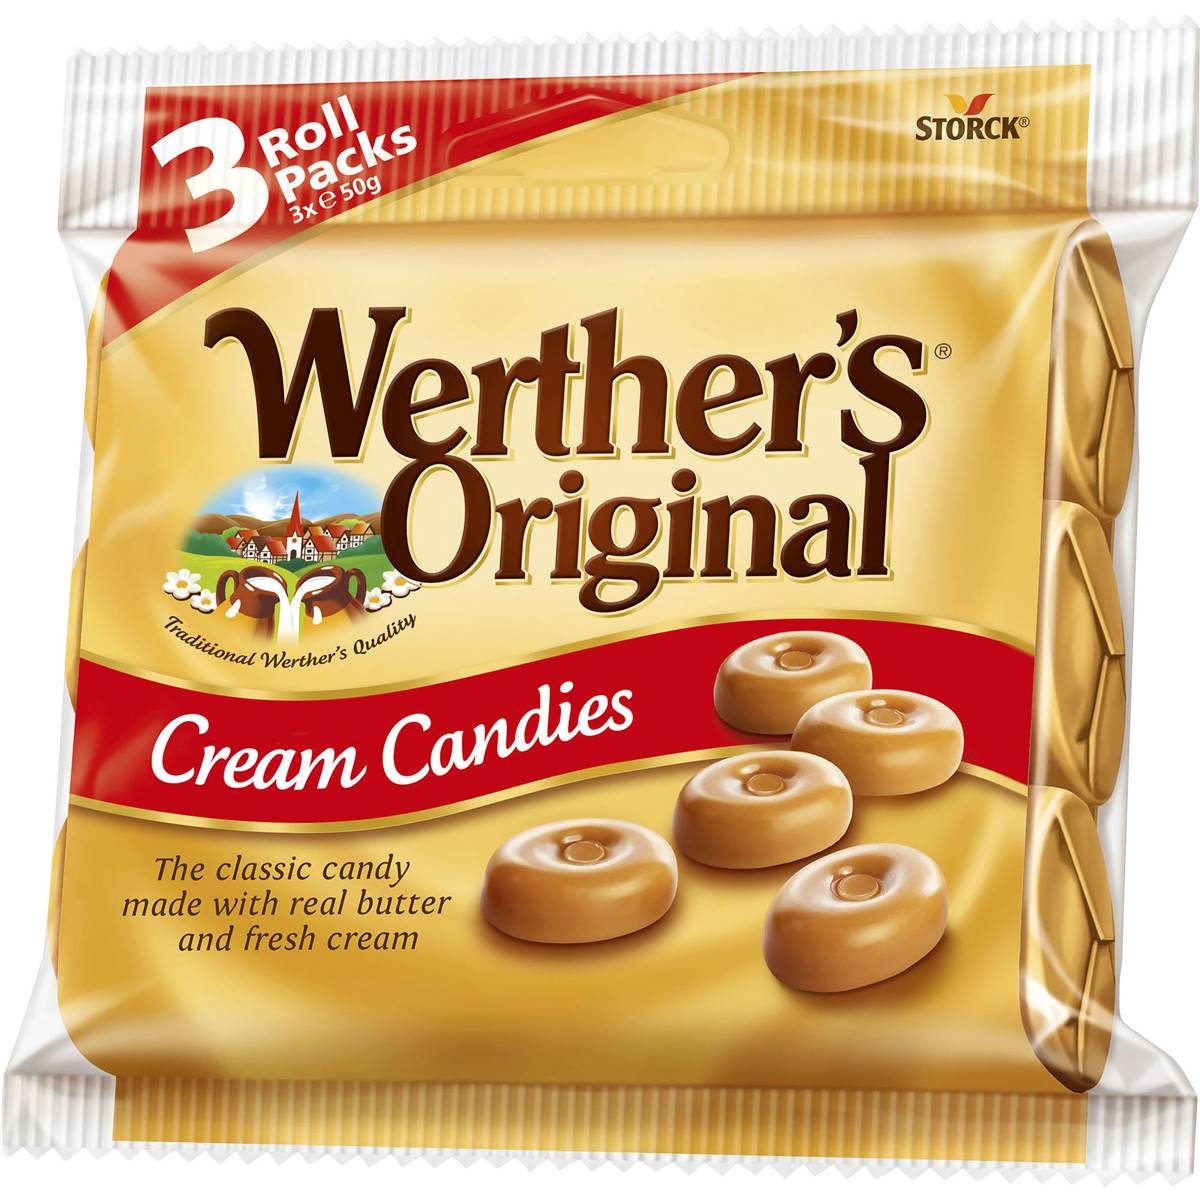 Calories in Werther's Original Toffees